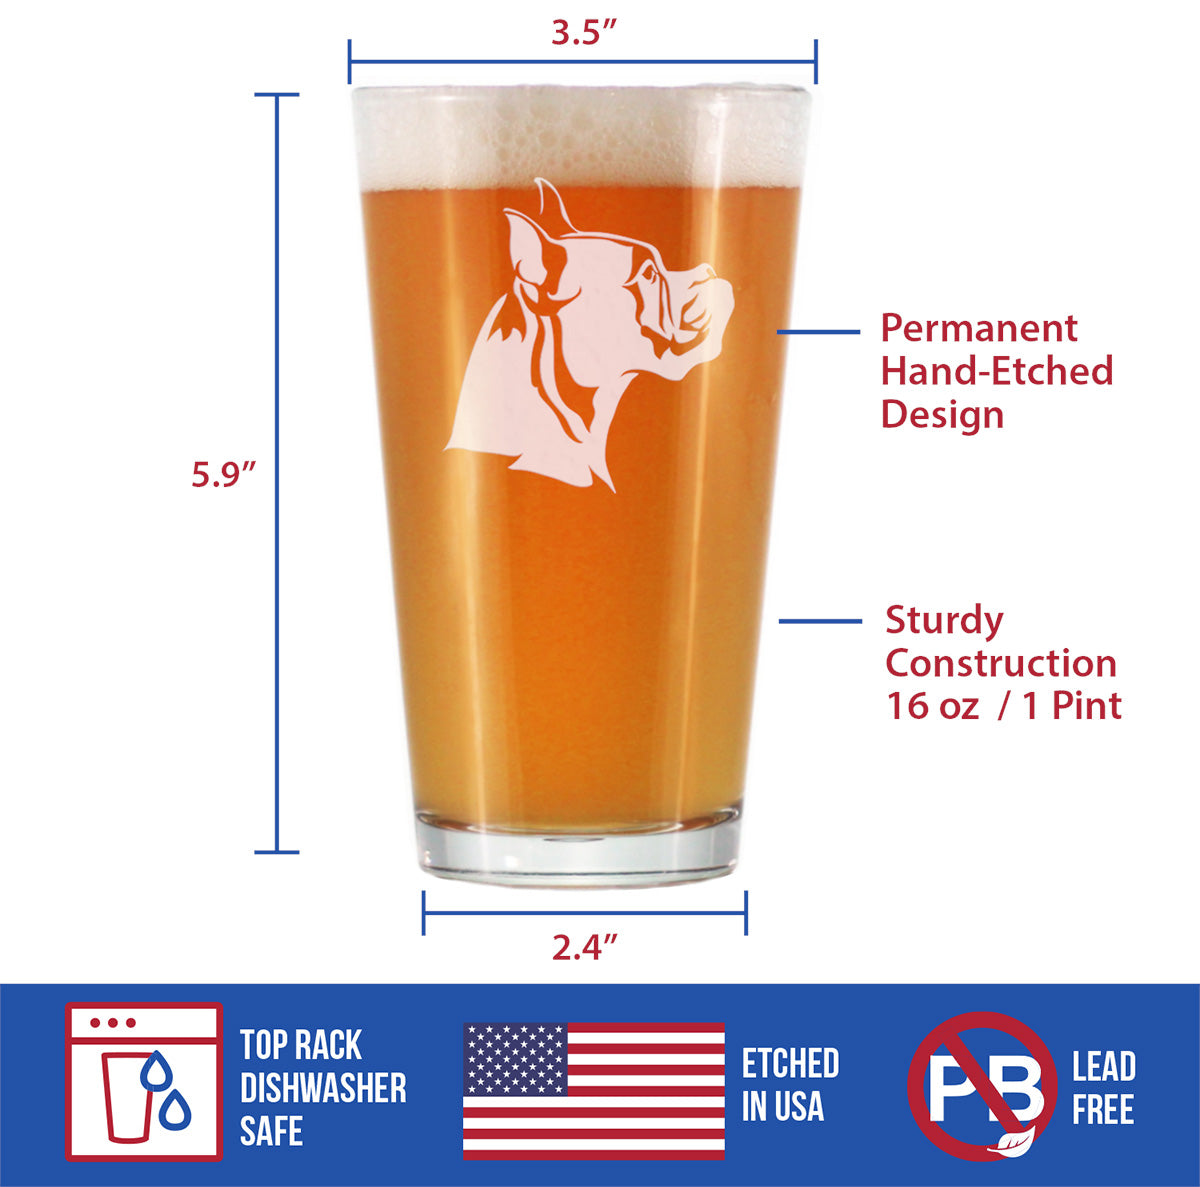 Boxer with Pointed Ears - Pint Glass for Beer - Fun Unique Boxer Themed Dog Gifts and Party Decor for Women and Men - 16 oz